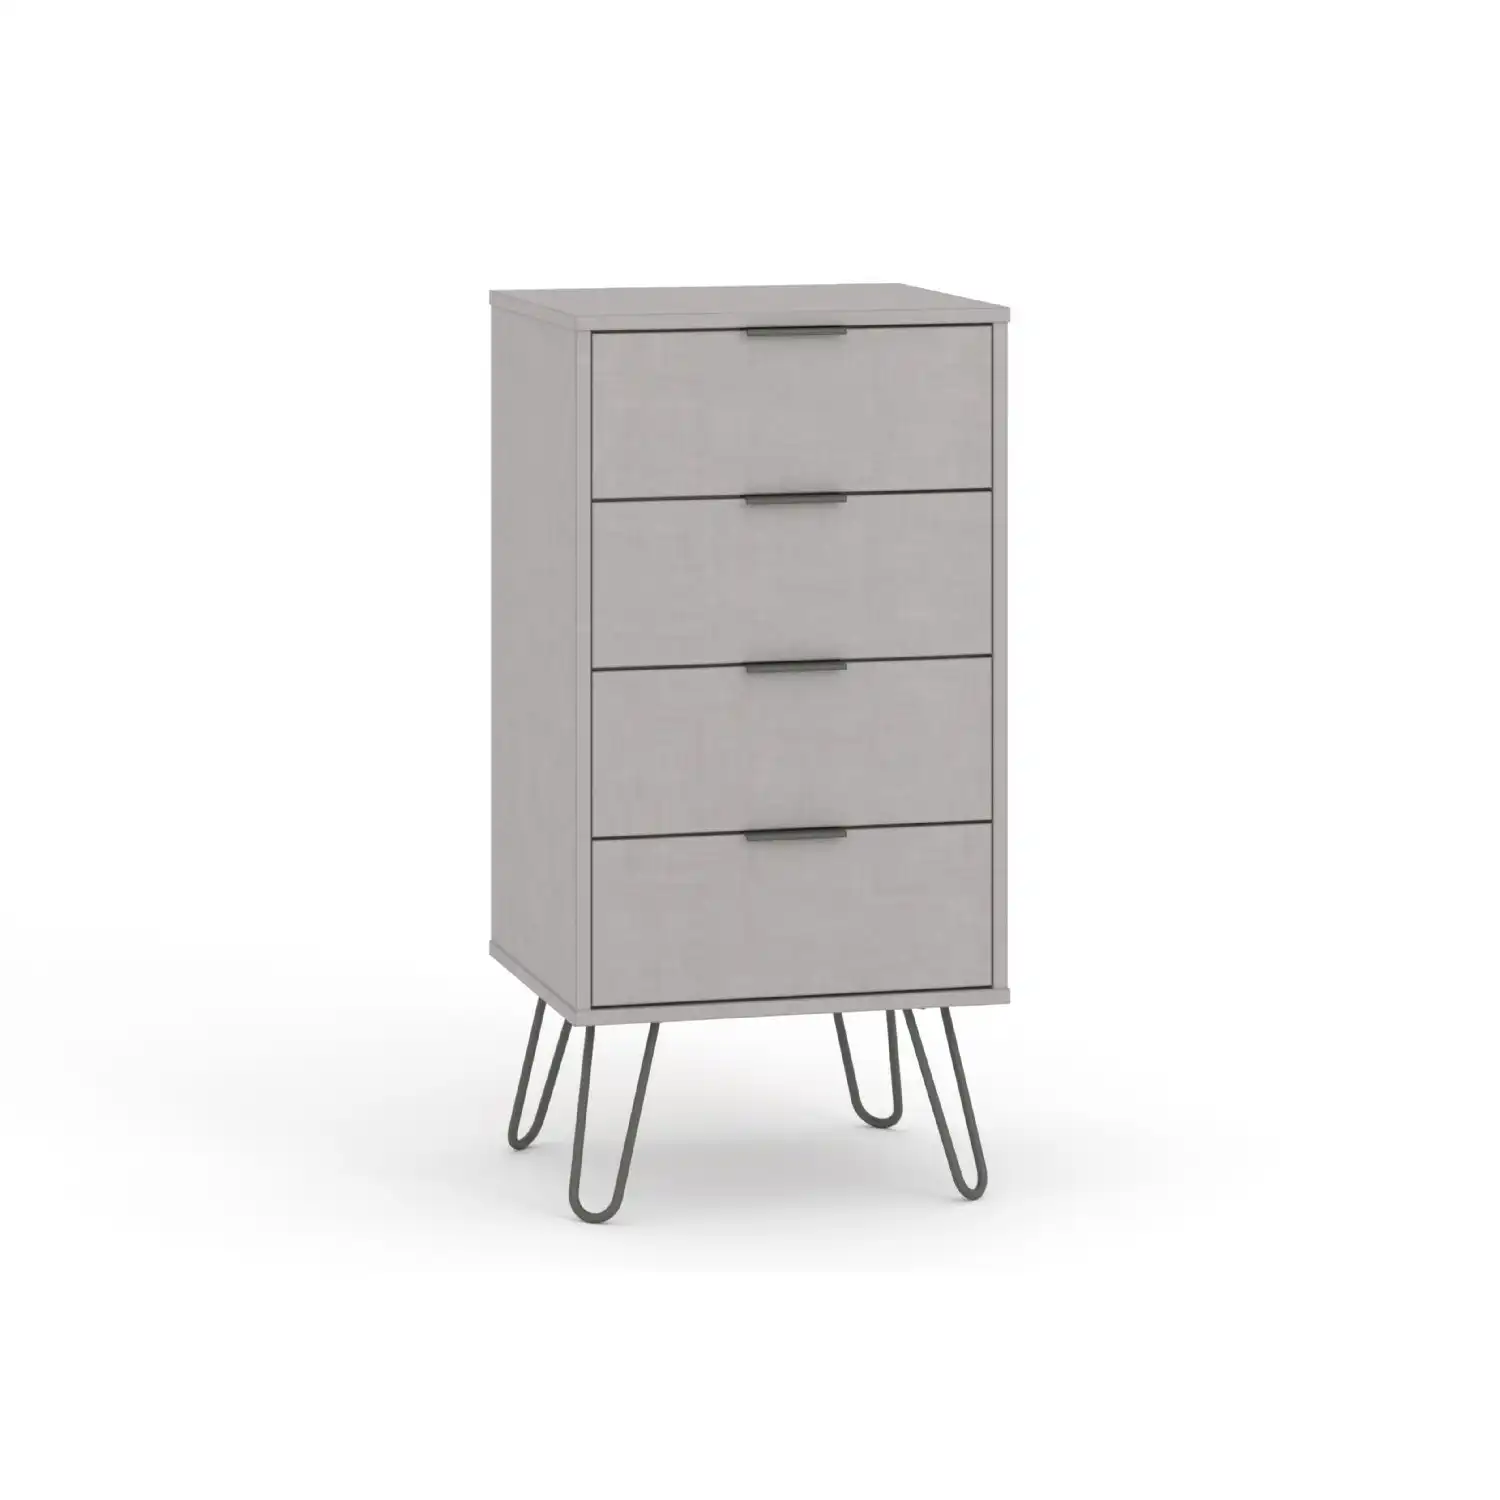 Stylish Narrow Grey 4 Tilting Drawer Bedroom Chest With Hair Pin Style Legs 9.03x4.5cm